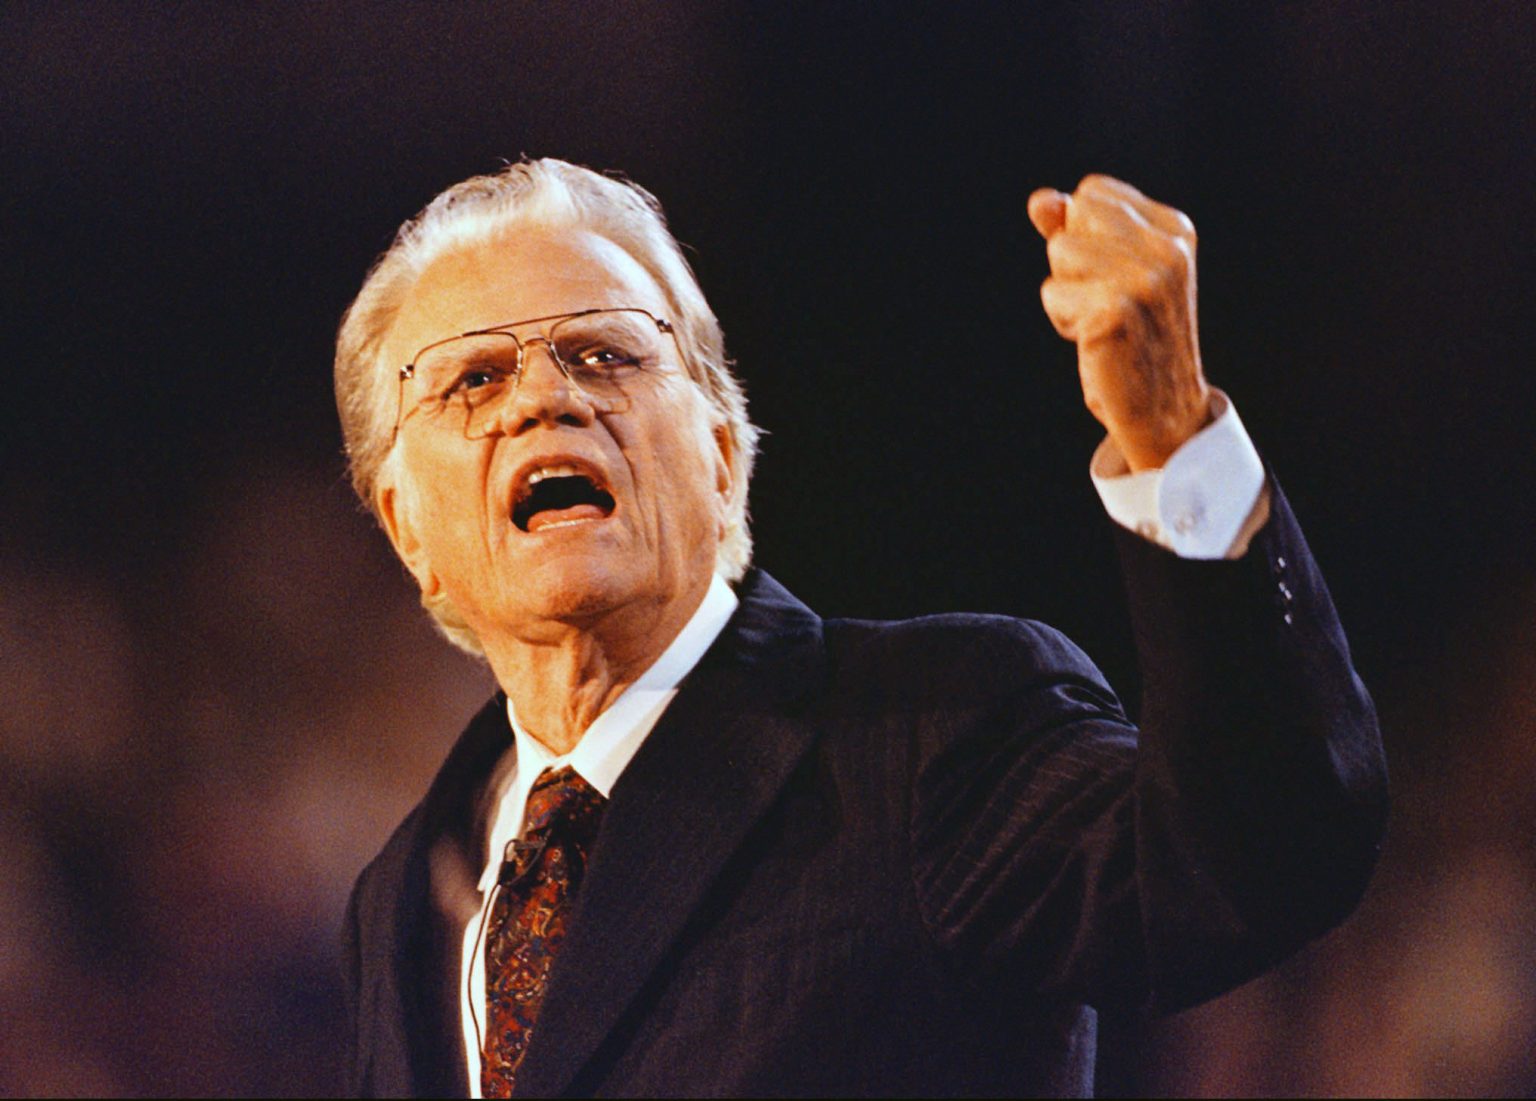 DOWNLOAD MP3: The Brevity of Time by Evangelist BILLY GRAHAM (Sermon) 7